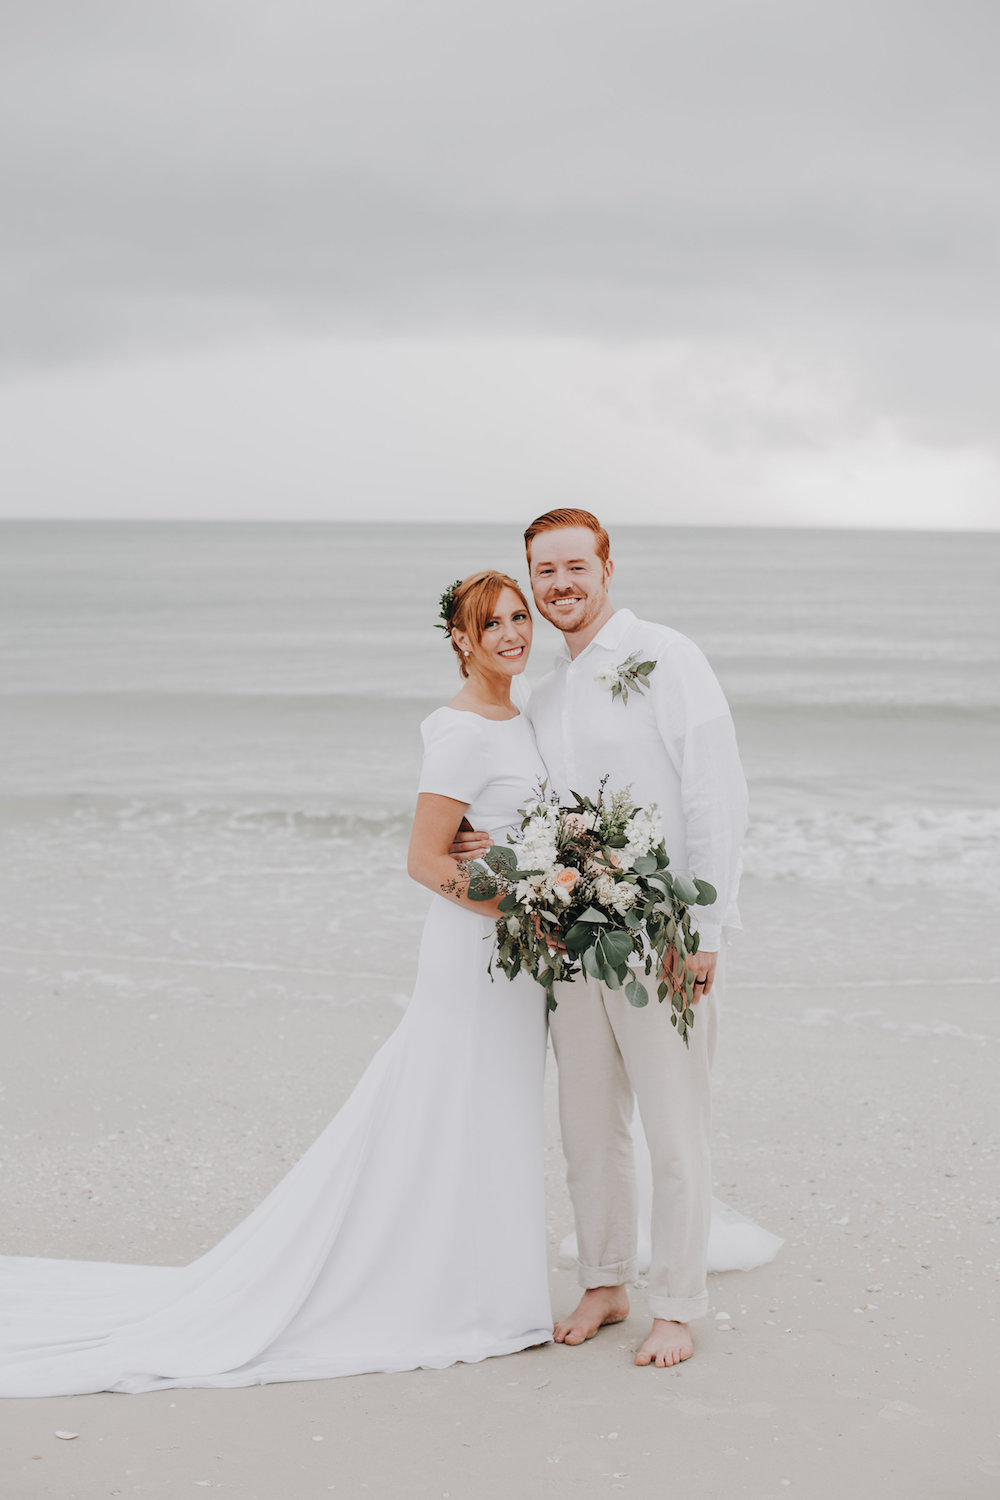 Beautiful Naples, Florida Elopement with Beach-Chic Details